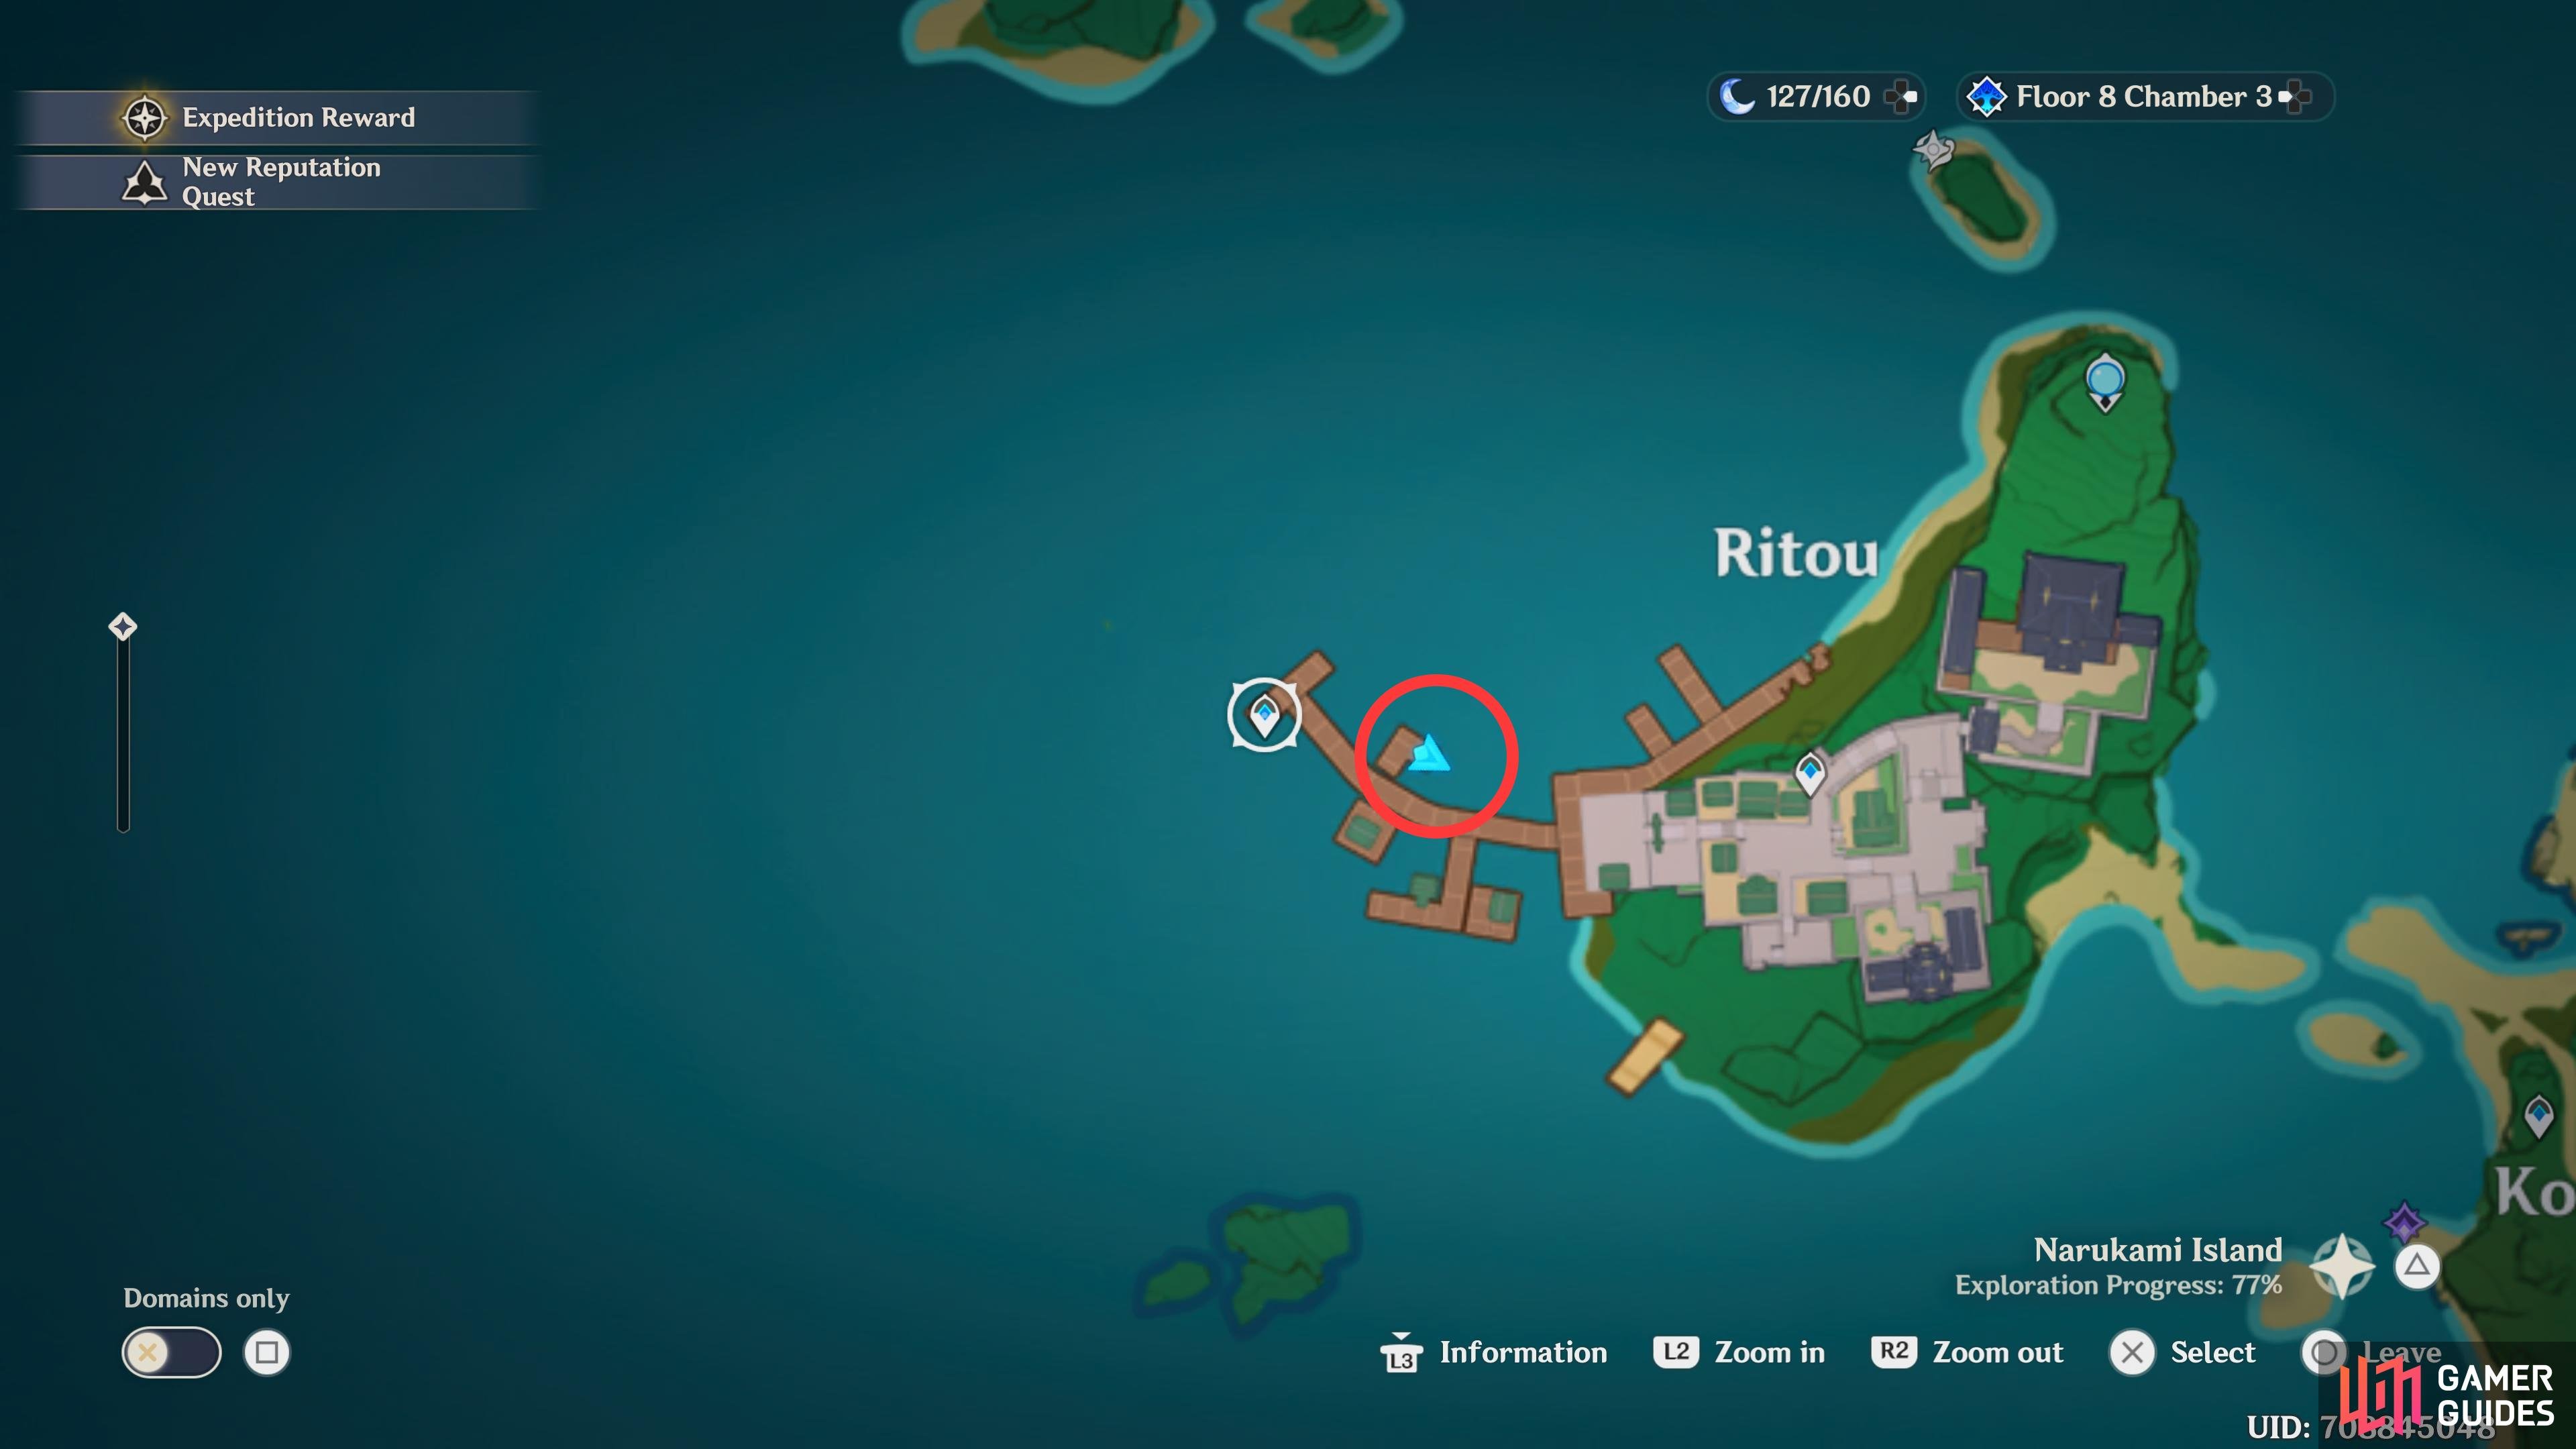 The Ritou Docks Fishing Point is located in the middle of the docks in Ritou.